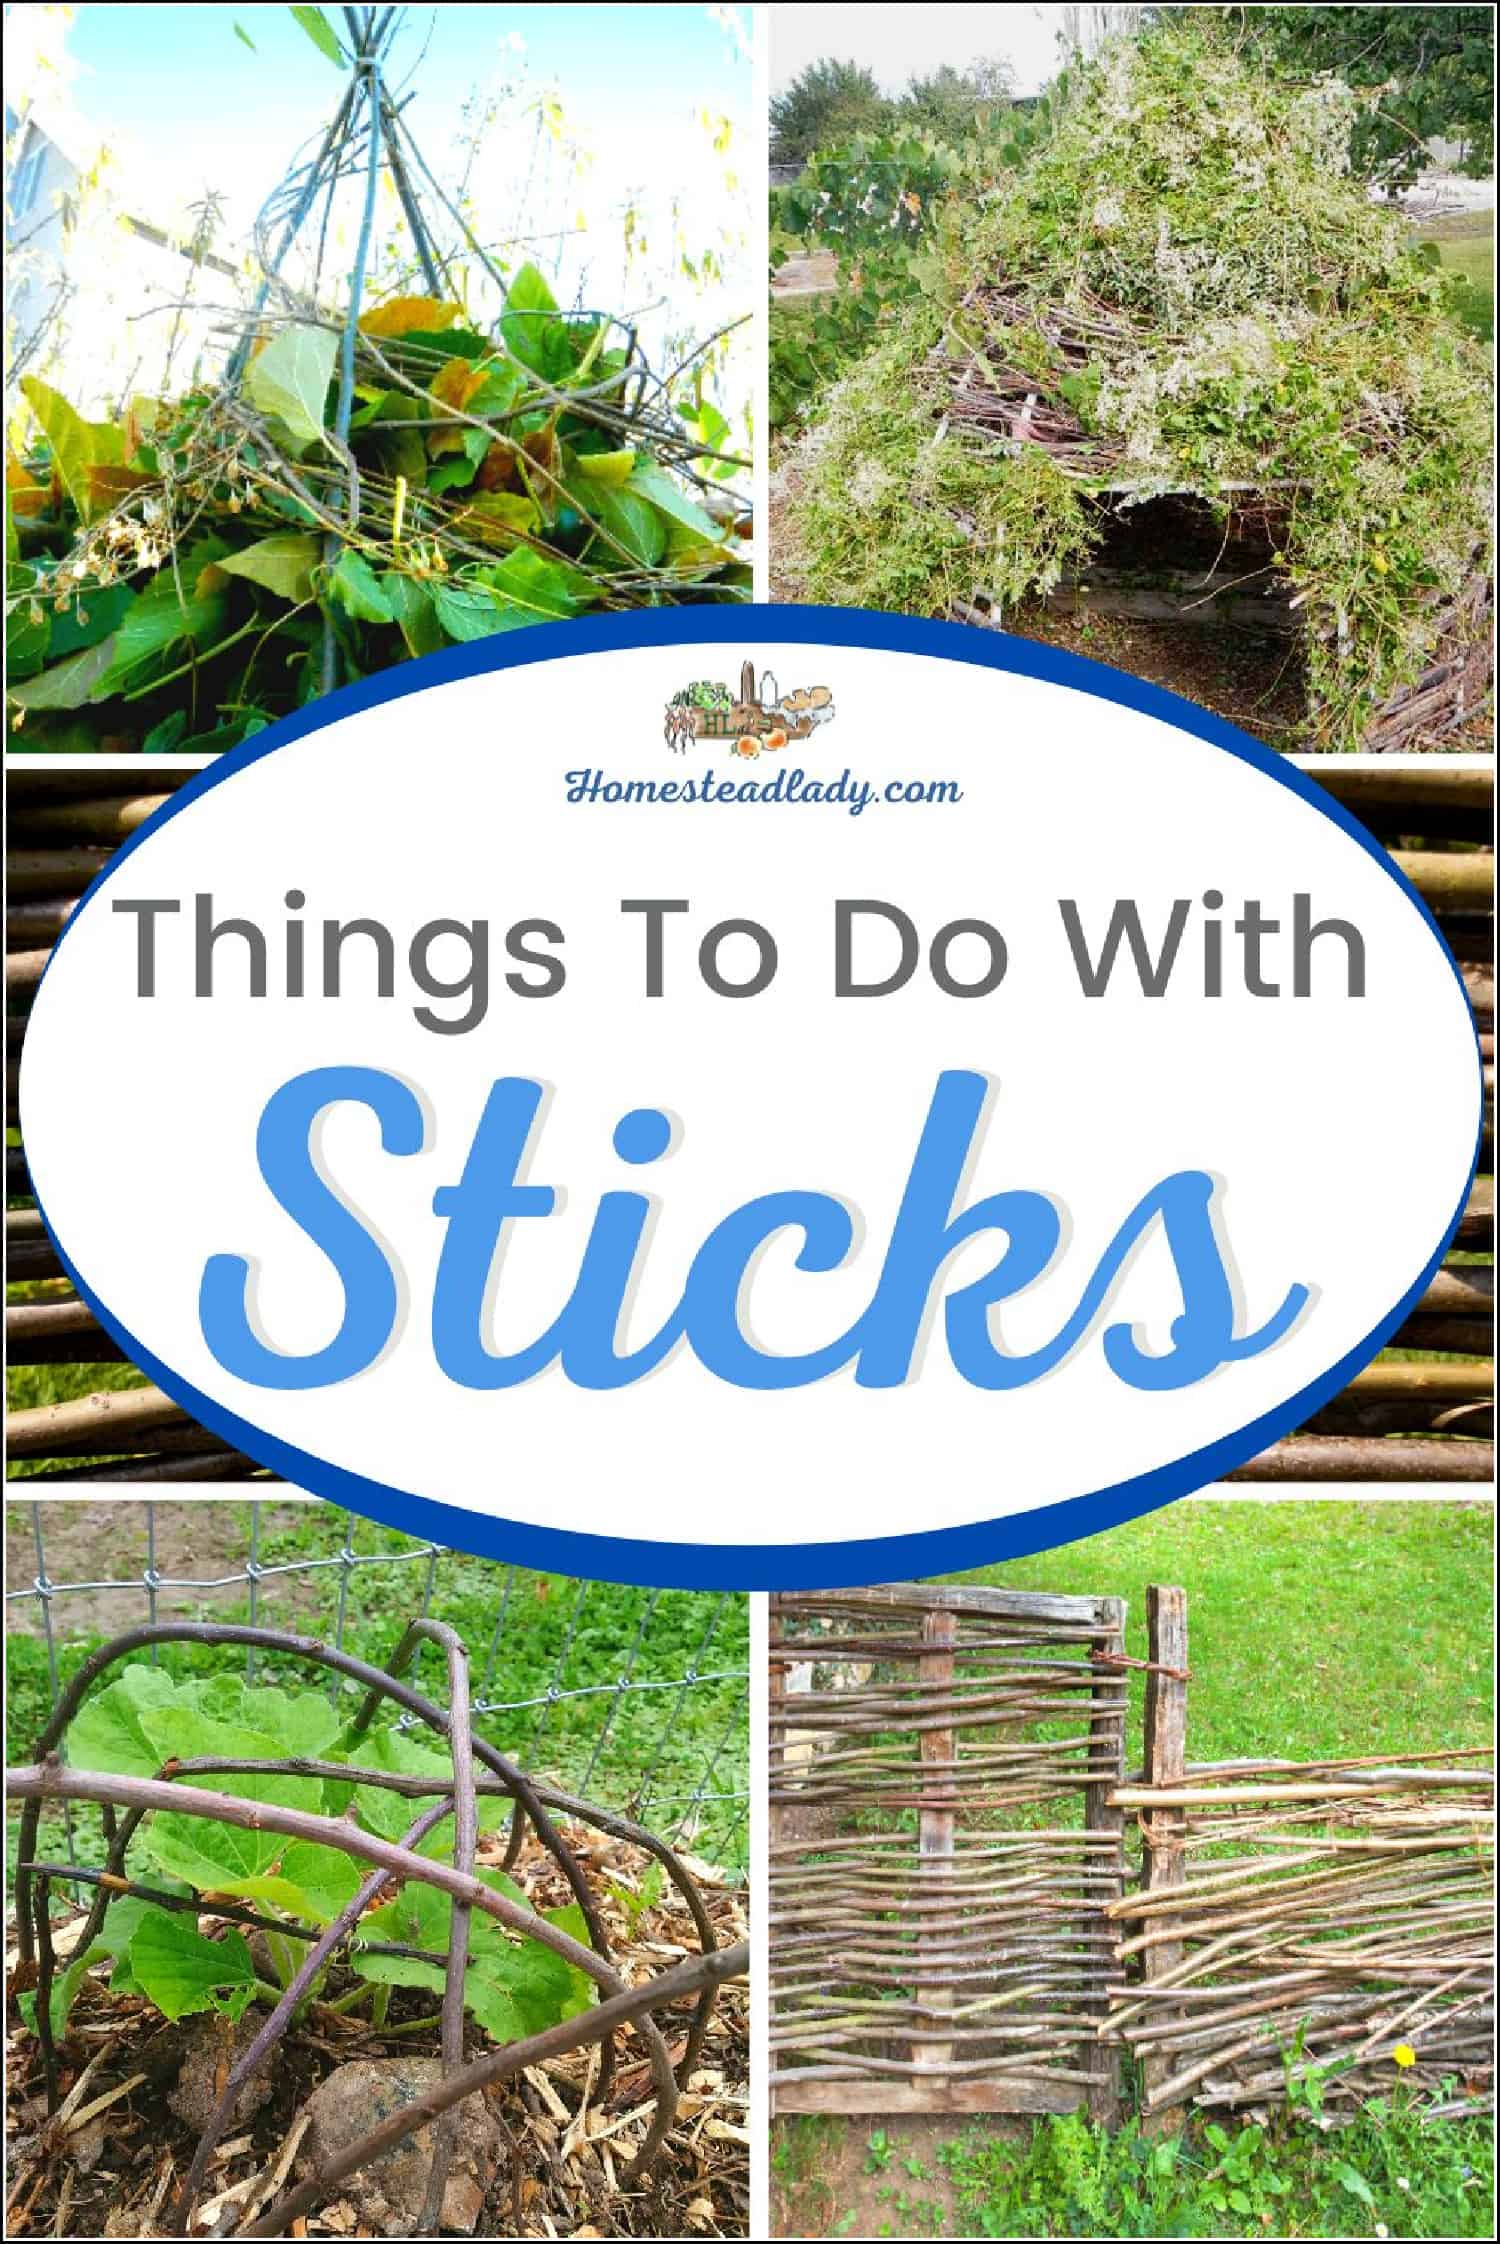 various structures made of sticks